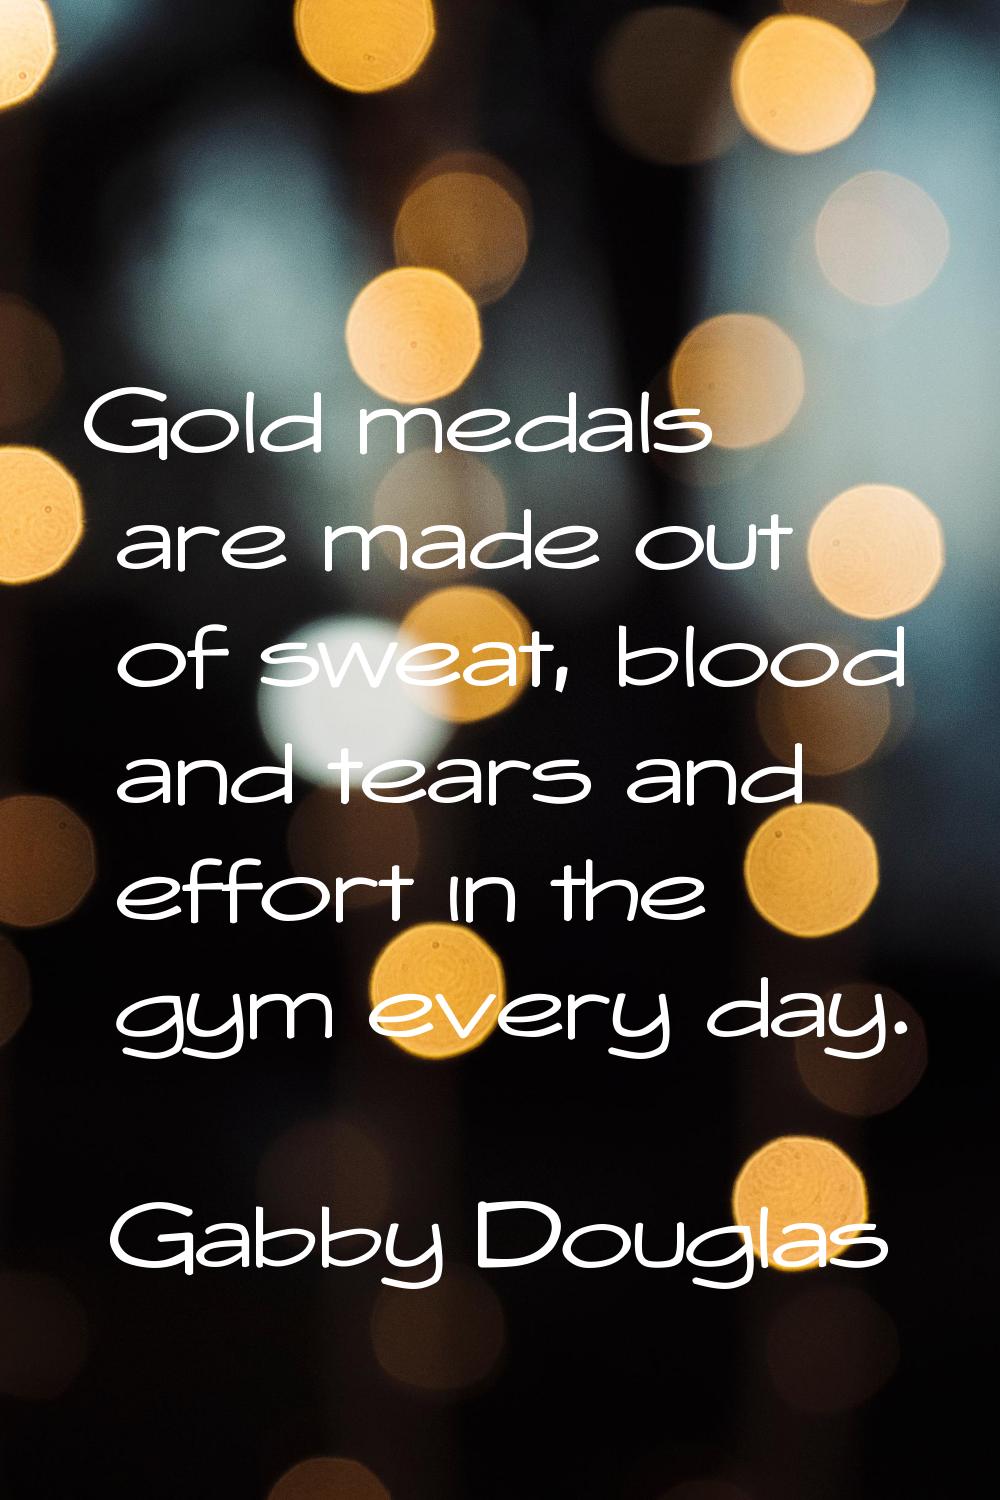 Gold medals are made out of sweat, blood and tears and effort in the gym every day.